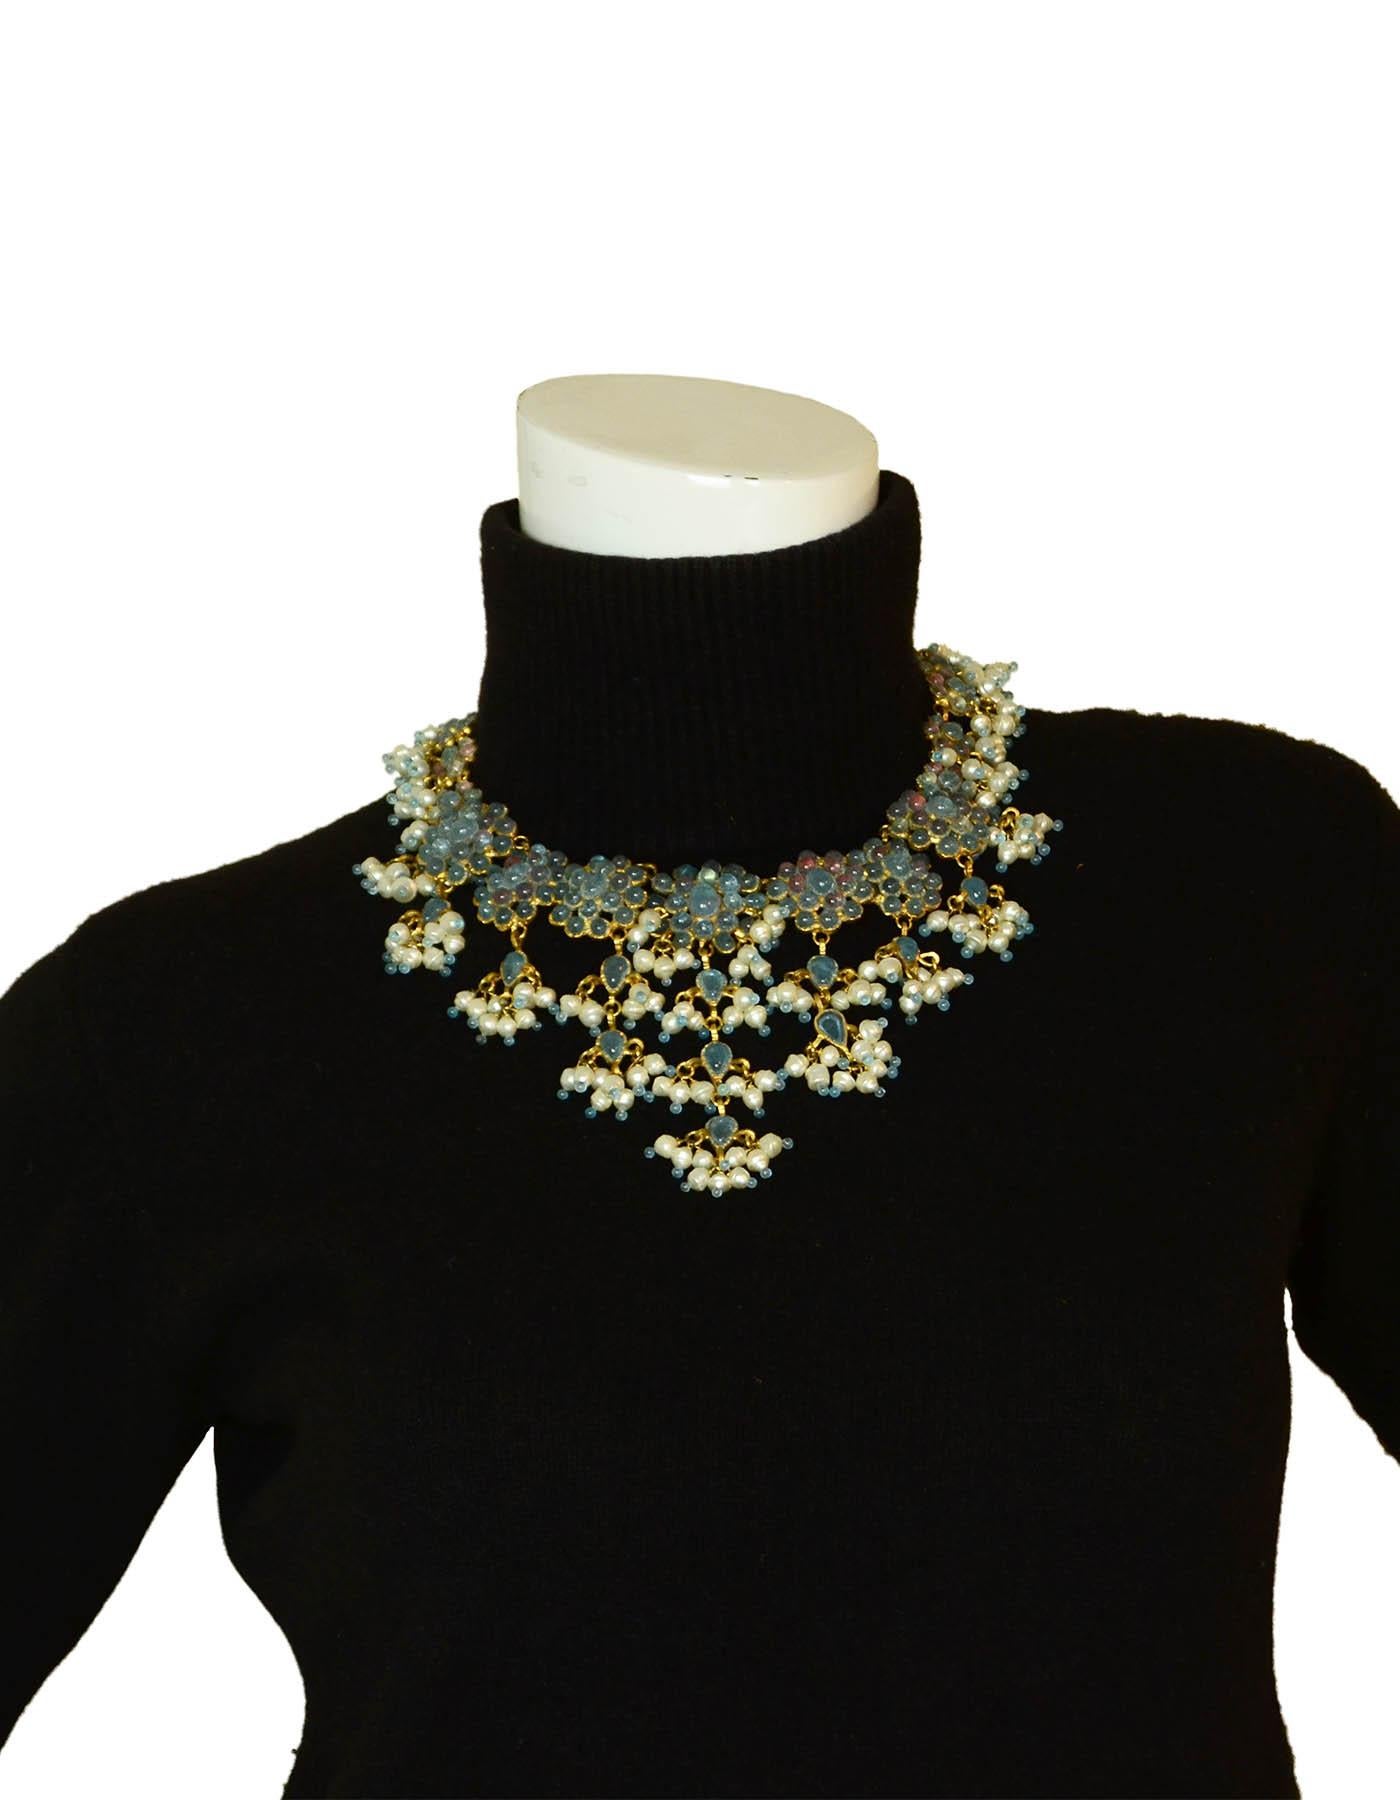 Rare Chanel 70’s Vintage Blue Gripoix & Faux Pearl Statement Necklace

Made In: France
Year of Production: 1990’s
Color: Blue
Materials: Gripoix and faux pearl
Hallmarks: Chanel stamp
Closure/Opening: Hook
Overall Condition: Excellent with the